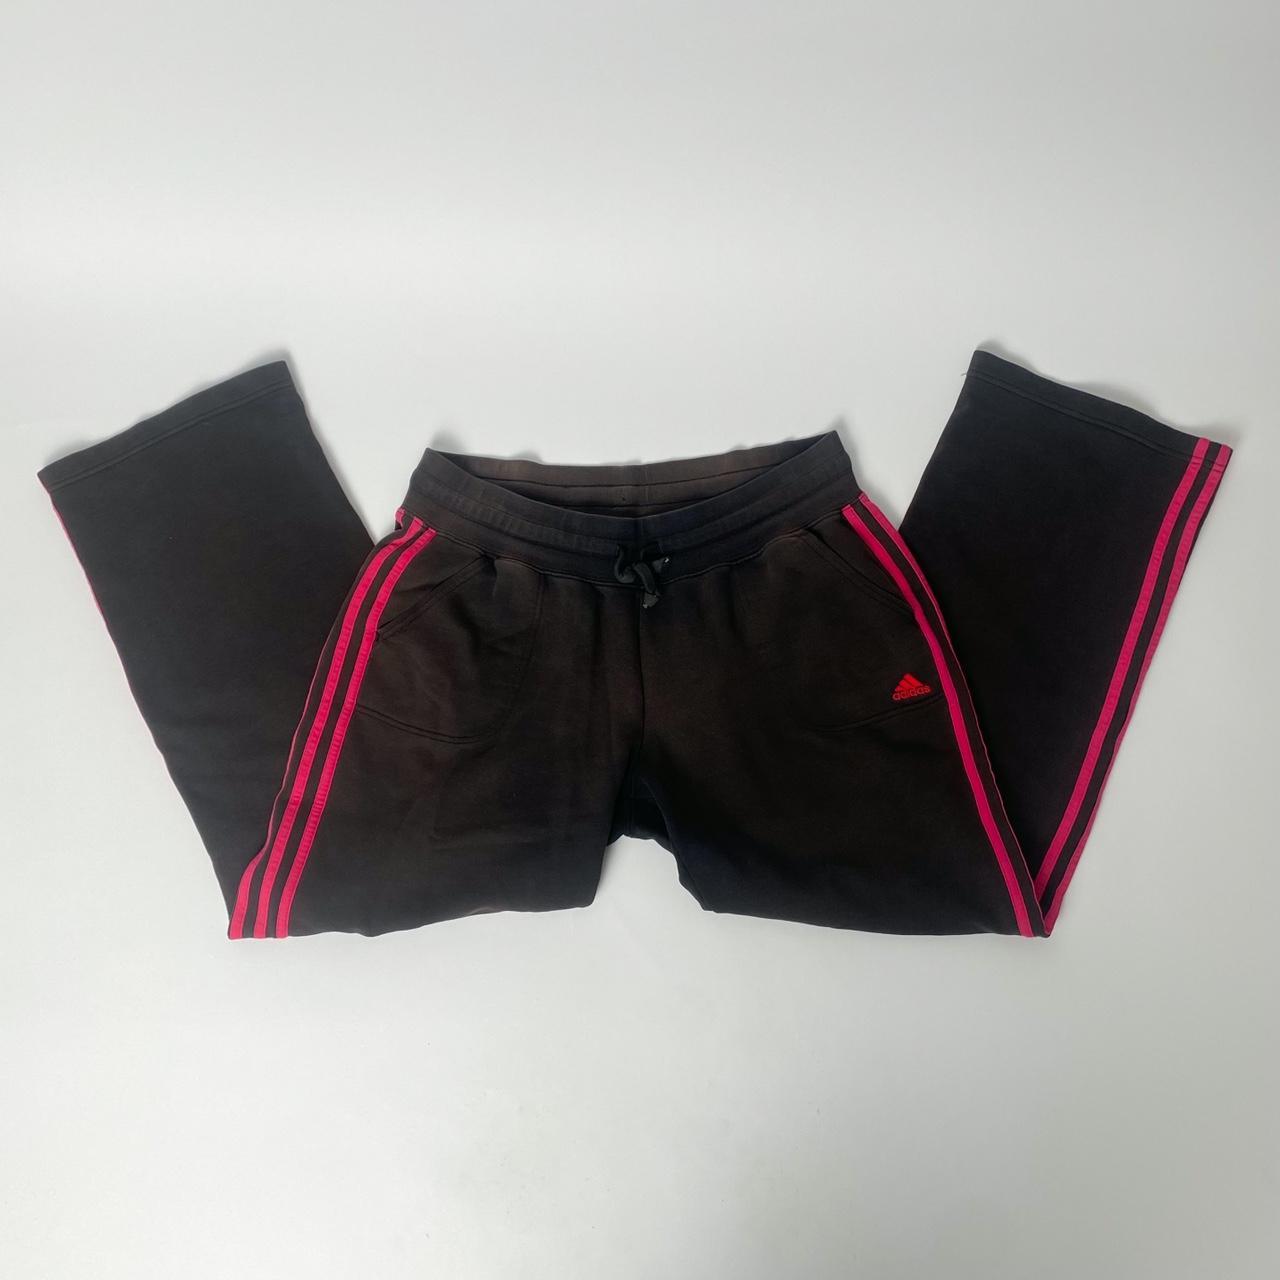 Adidas Women's Black and Pink Joggers-tracksuits | Depop